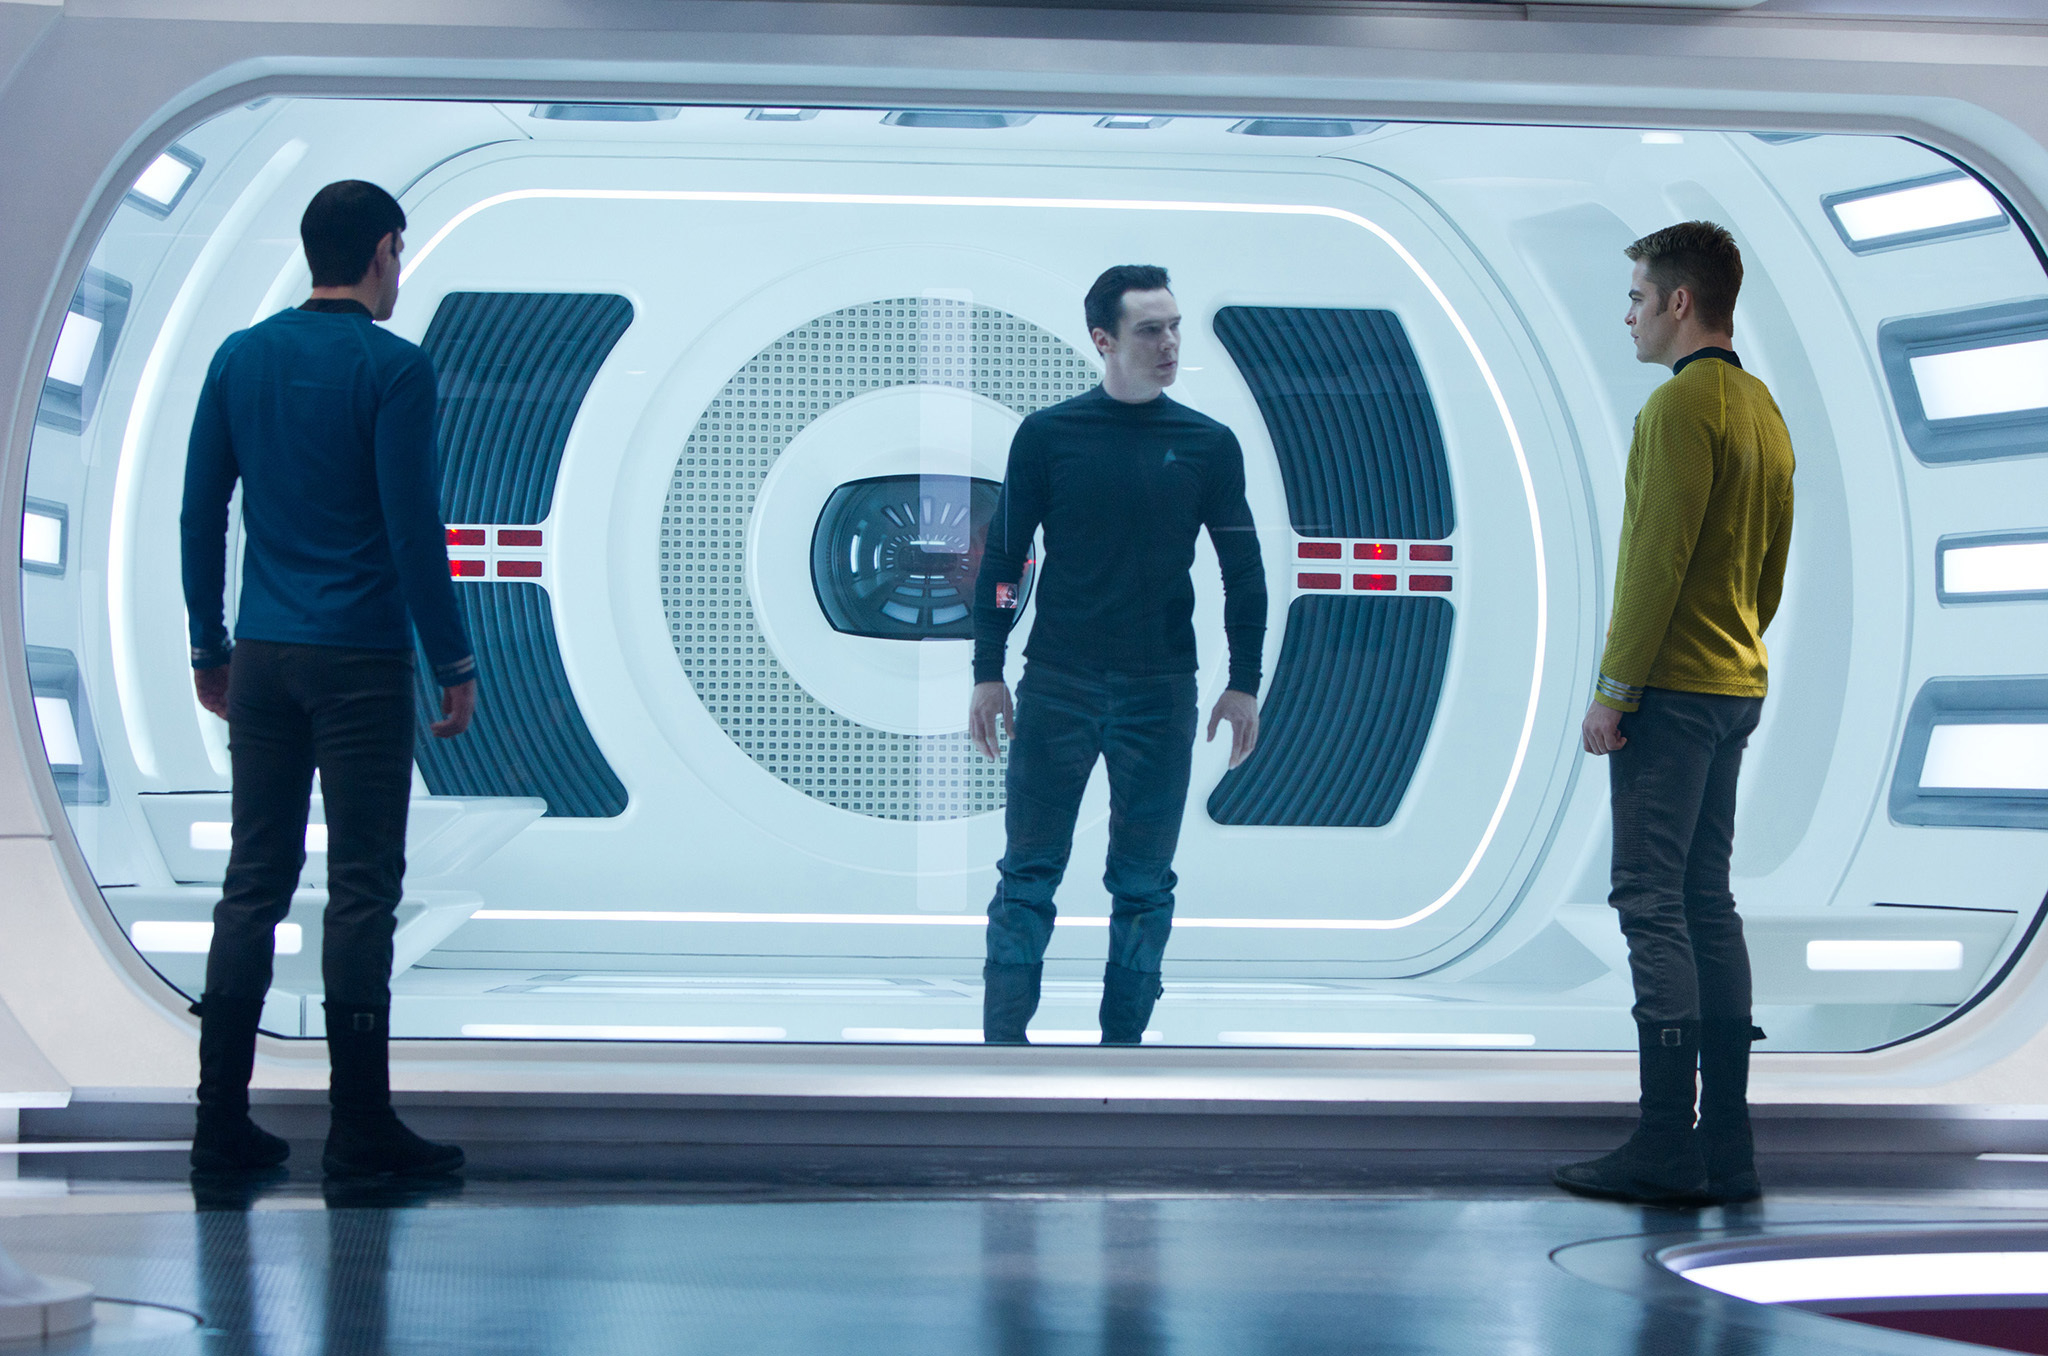 2048x1356 Star Trek Into Darkness 2013, directed by JJ Abrams | Film review